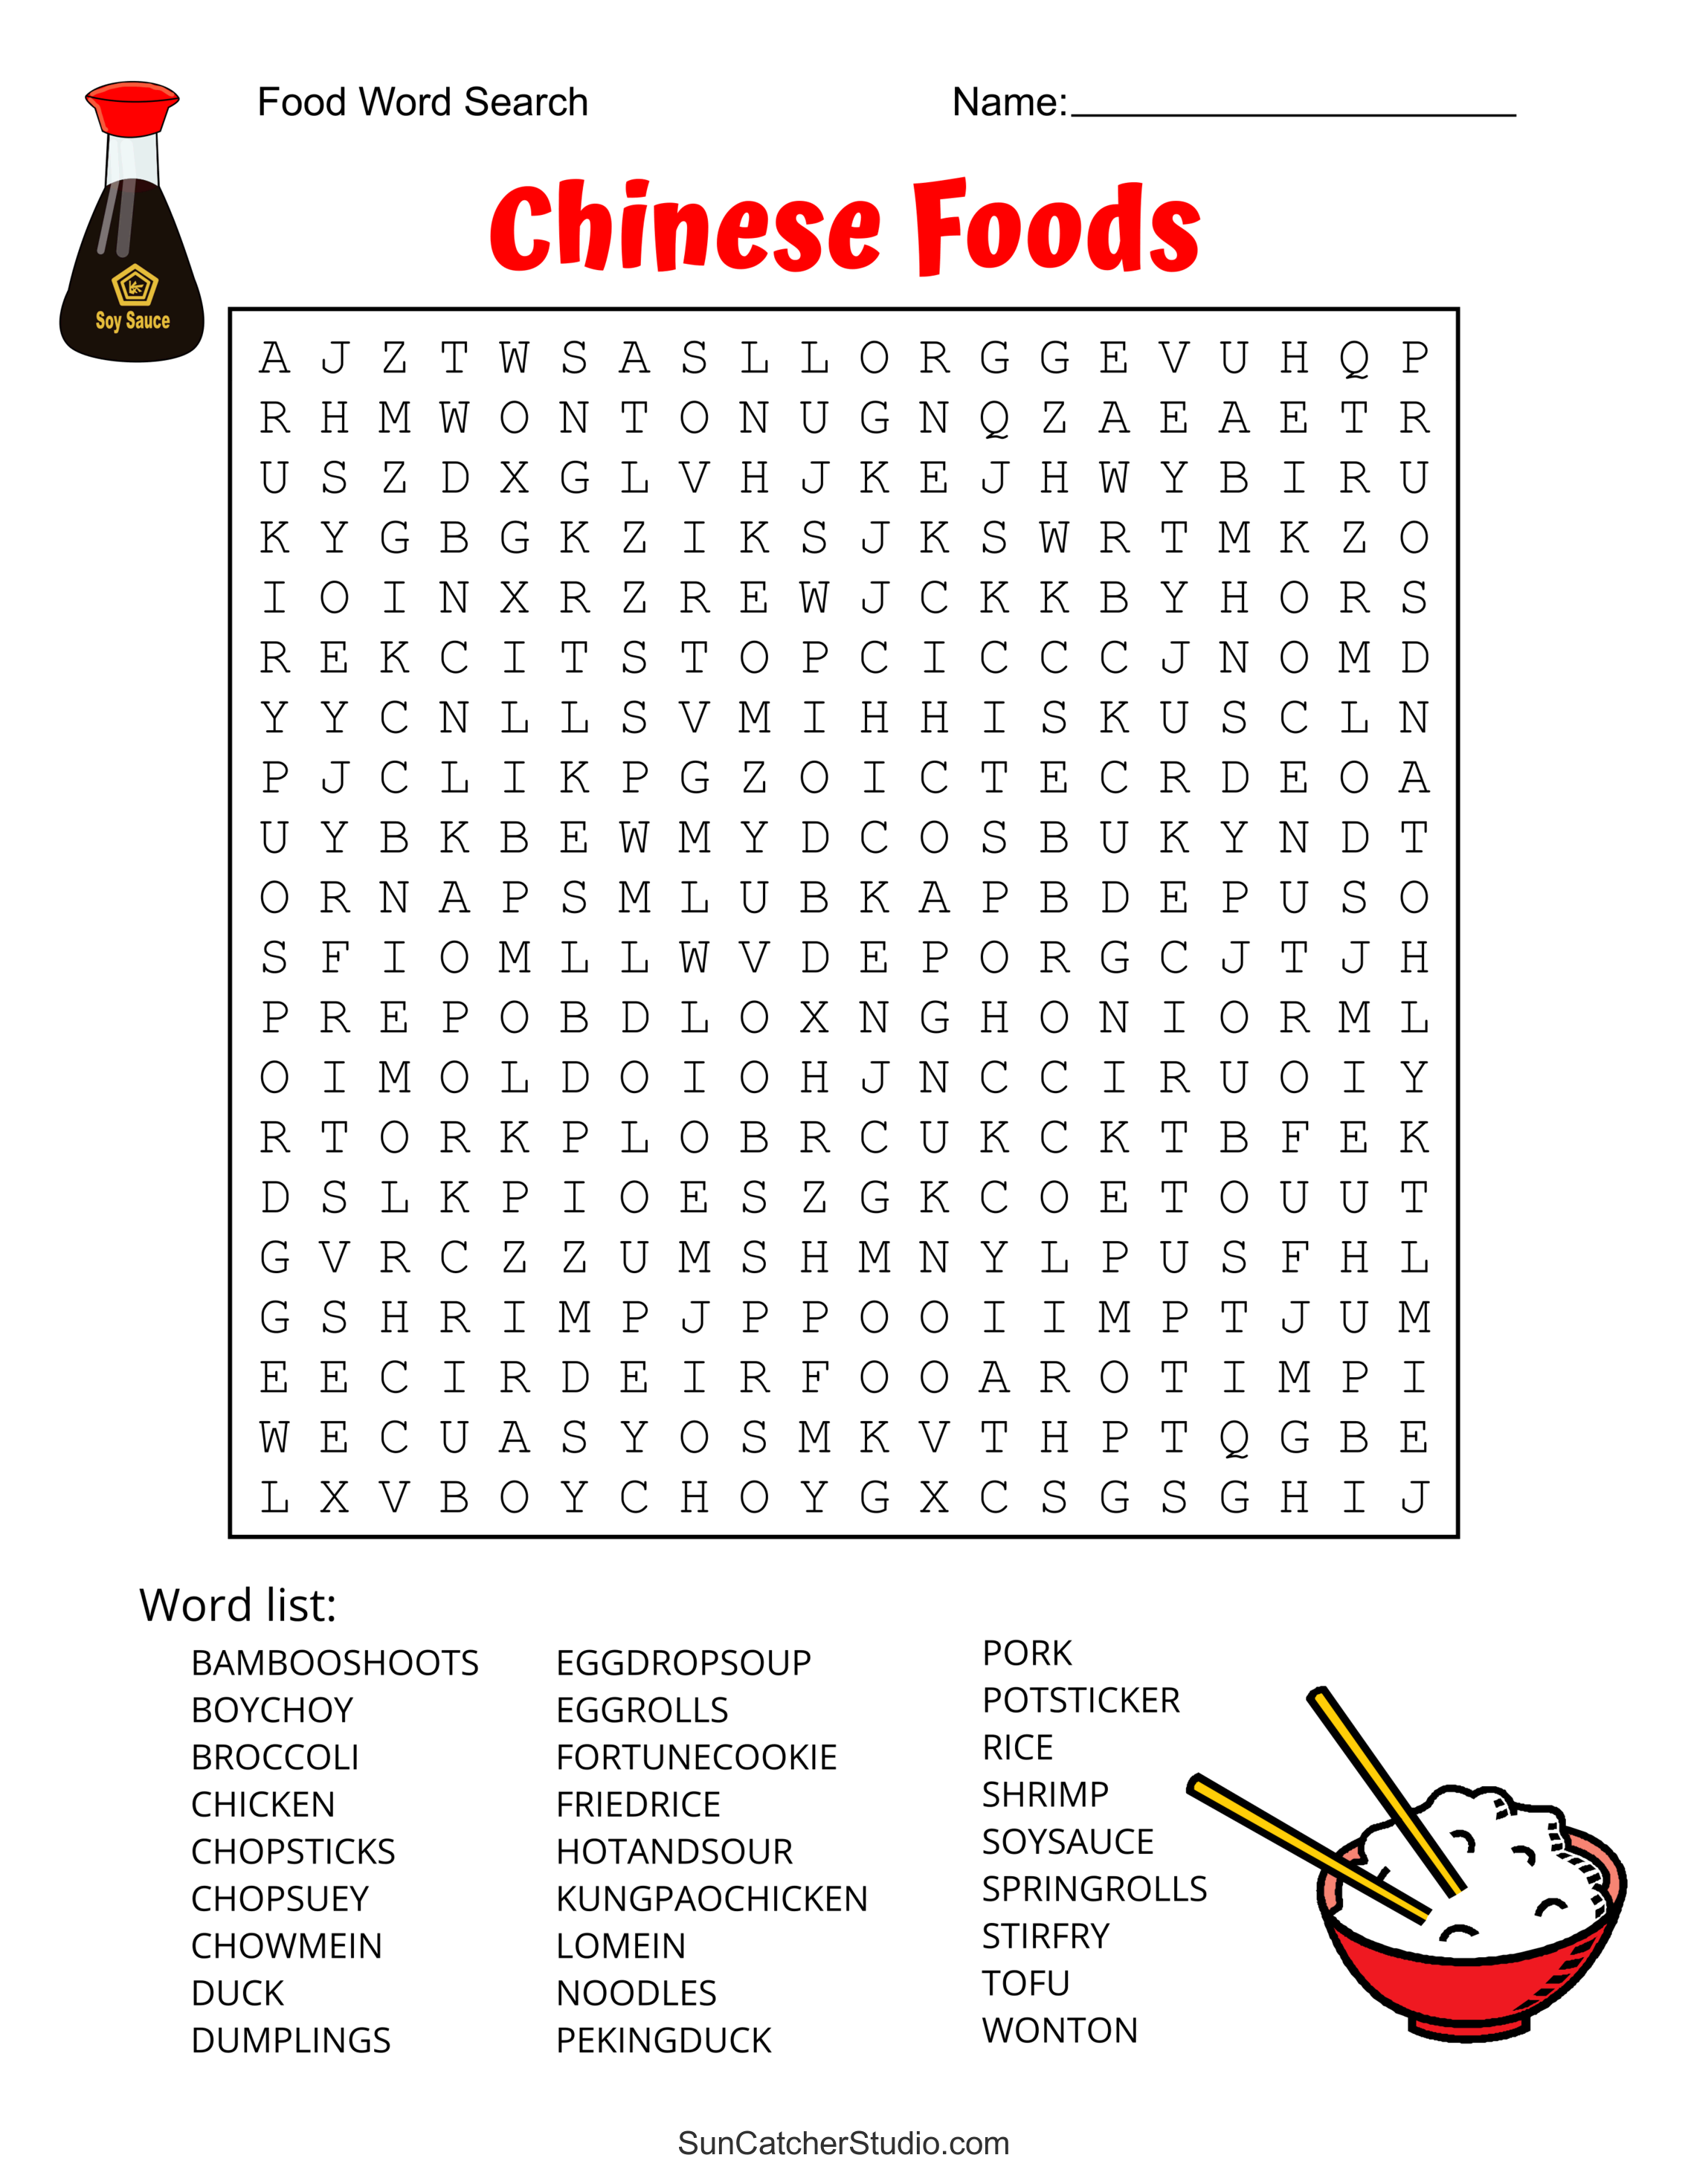 FAST FOOD Word Search Puzzle Worksheet Activity